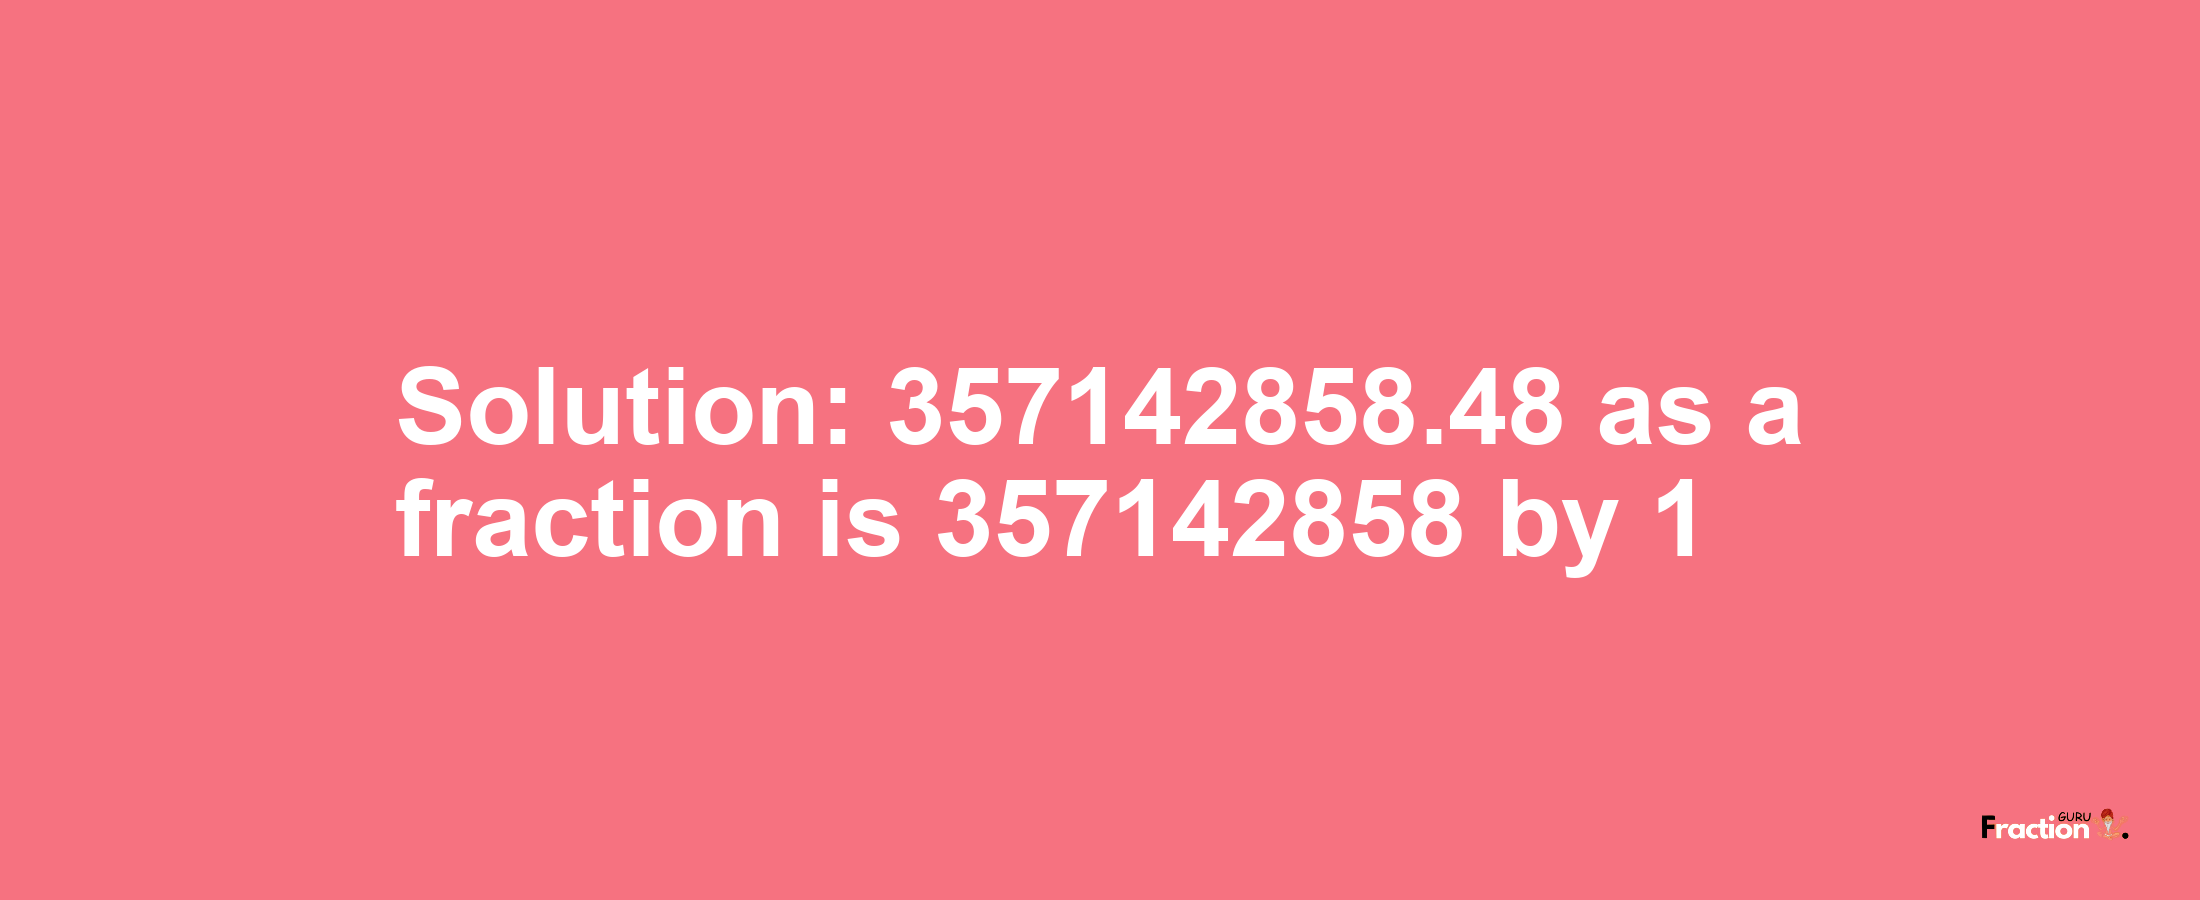 Solution:357142858.48 as a fraction is 357142858/1